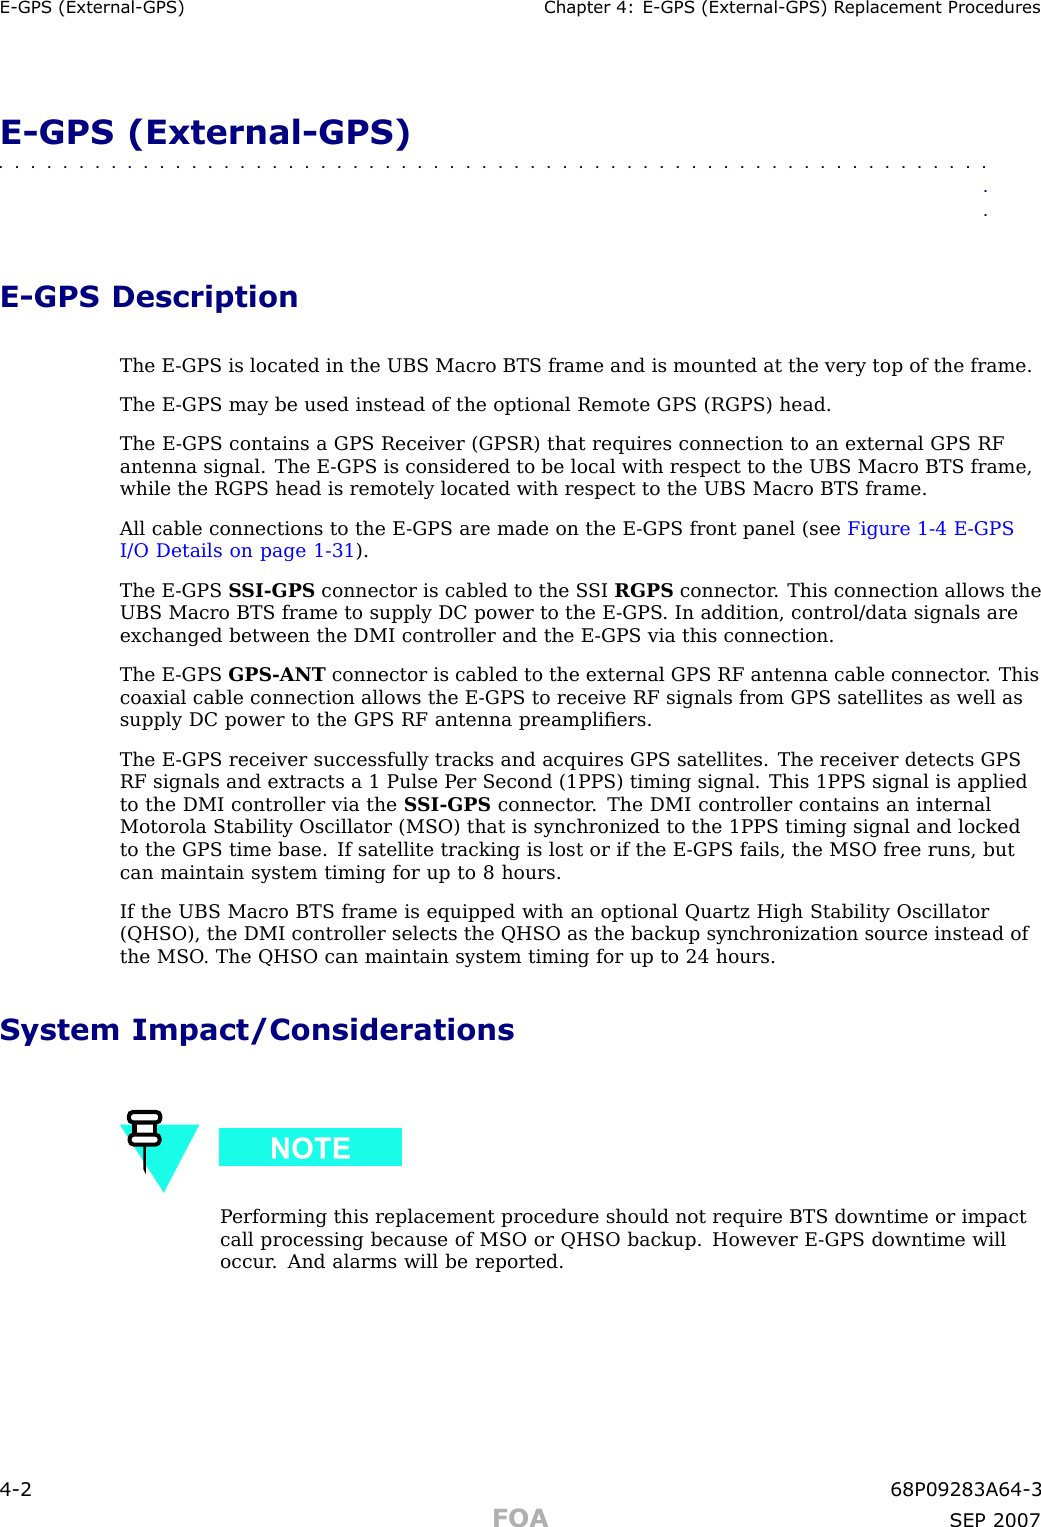 E -GPS (External -GPS) Chapter 4: E -GPS (External -GPS) R eplacement ProceduresE -GPS (External -GPS)■■■■■■■■■■■■■■■■■■■■■■■■■■■■■■■■■■■■■■■■■■■■■■■■■■■■■■■■■■■■■■■■E -GPS DescriptionThe E -GPS is located in the UBS Macro BTS frame and is mounted at the very top of the frame.The E -GPS may be used instead of the optional Remote GPS (RGPS) head.The E -GPS contains a GPS Receiver (GPSR) that requires connection to an external GPS RFantenna signal. The E -GPS is considered to be local with respect to the UBS Macro BTS frame,while the RGPS head is remotely located with respect to the UBS Macro BTS frame.All cable connections to the E -GPS are made on the E -GPS front panel (see Figure 1 -4 E -GPSI/O Details on page 1 - 31 ).The E -GPS S SI -GPS connector is cabled to the S SI RGPS connector . This connection allows theUBS Macro BTS frame to supply DC power to the E -GPS . In addition, control/data signals areexchanged between the DMI controller and the E -GPS via this connection.The E -GPS GPS -ANT connector is cabled to the external GPS RF antenna cable connector . Thiscoaxial cable connection allows the E -GPS to receive RF signals from GPS satellites as well assupply DC power to the GPS RF antenna preampliﬁers.The E -GPS receiver successfully tracks and acquires GPS satellites. The receiver detects GPSRF signals and extracts a 1 Pulse P er Second (1PPS) timing signal. This 1PPS signal is appliedto the DMI controller via the S SI -GPS connector . The DMI controller contains an internalMotorola Stability Oscillator (MSO) that is synchronized to the 1PPS timing signal and lockedto the GPS time base. If satellite tracking is lost or if the E -GPS fails, the MSO free runs, butcan maintain system timing for up to 8 hours.If the UBS Macro BTS frame is equipped with an optional Quartz High Stability Oscillator(QHSO), the DMI controller selects the QHSO as the backup synchronization source instead ofthe MSO . The QHSO can maintain system timing for up to 24 hours.System Impact/ConsiderationsP erforming this replacement procedure should not require BTS downtime or impactcall processing because of MSO or QHSO backup. However E -GPS downtime willoccur . And alarms will be reported.4 -2 68P09283A64 -3FOA SEP 2007